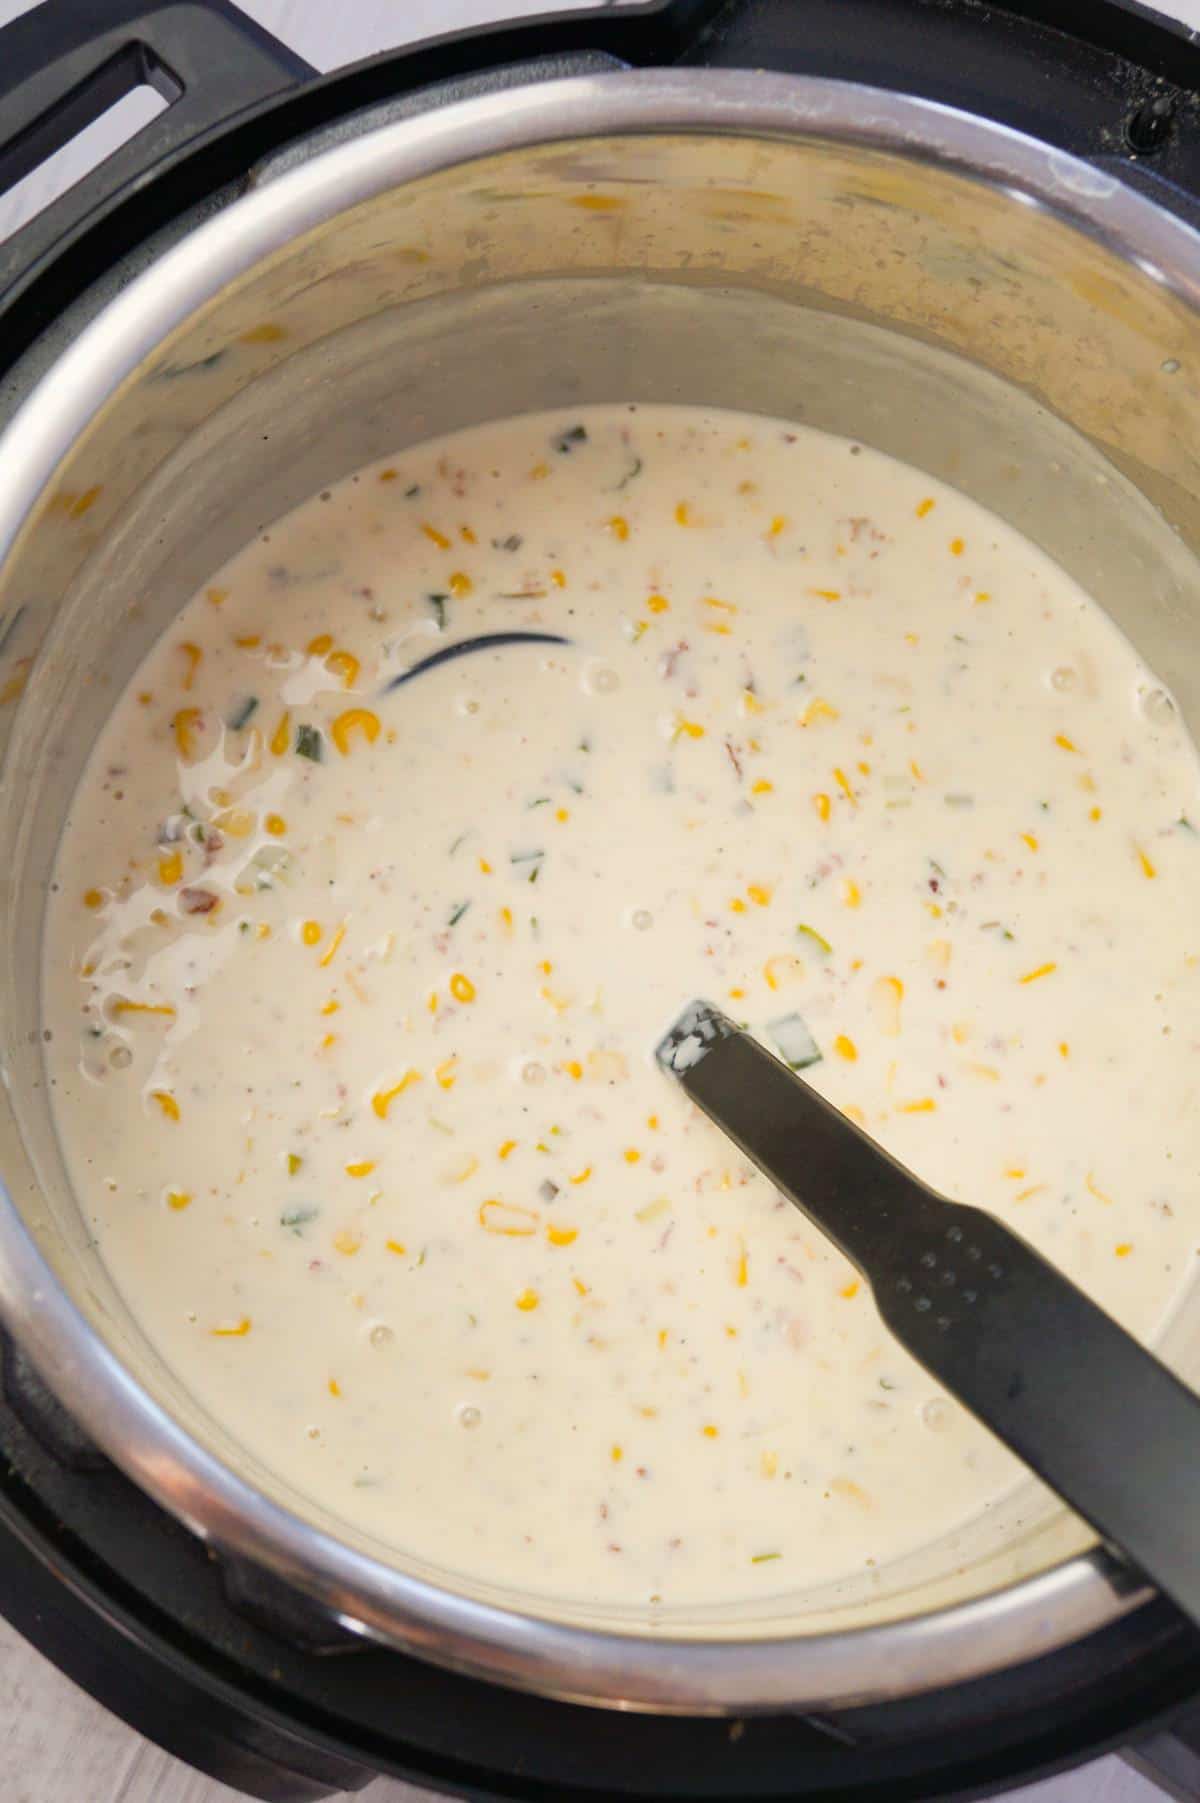 Instant Pot Corn Chowder with Cream Cheese and Bacon is a hearty soup recipe loaded with corn, crumbled bacon, Philadelphia whipped chive cream cheese and chopped green onions.